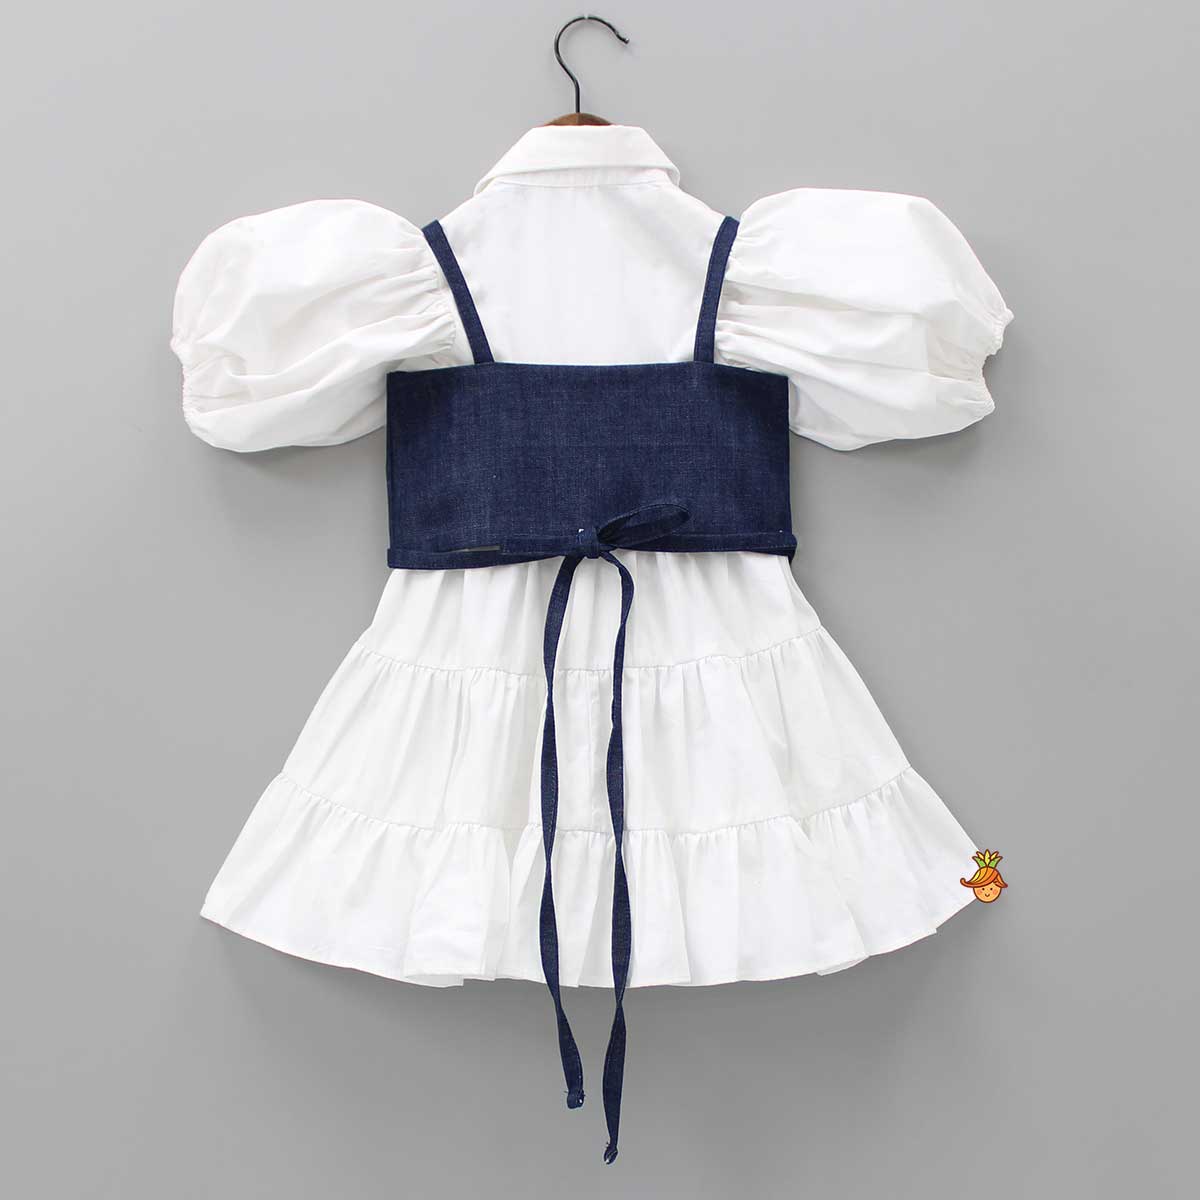 White Shirt Style Tiered Dress With Denim Top And Cap